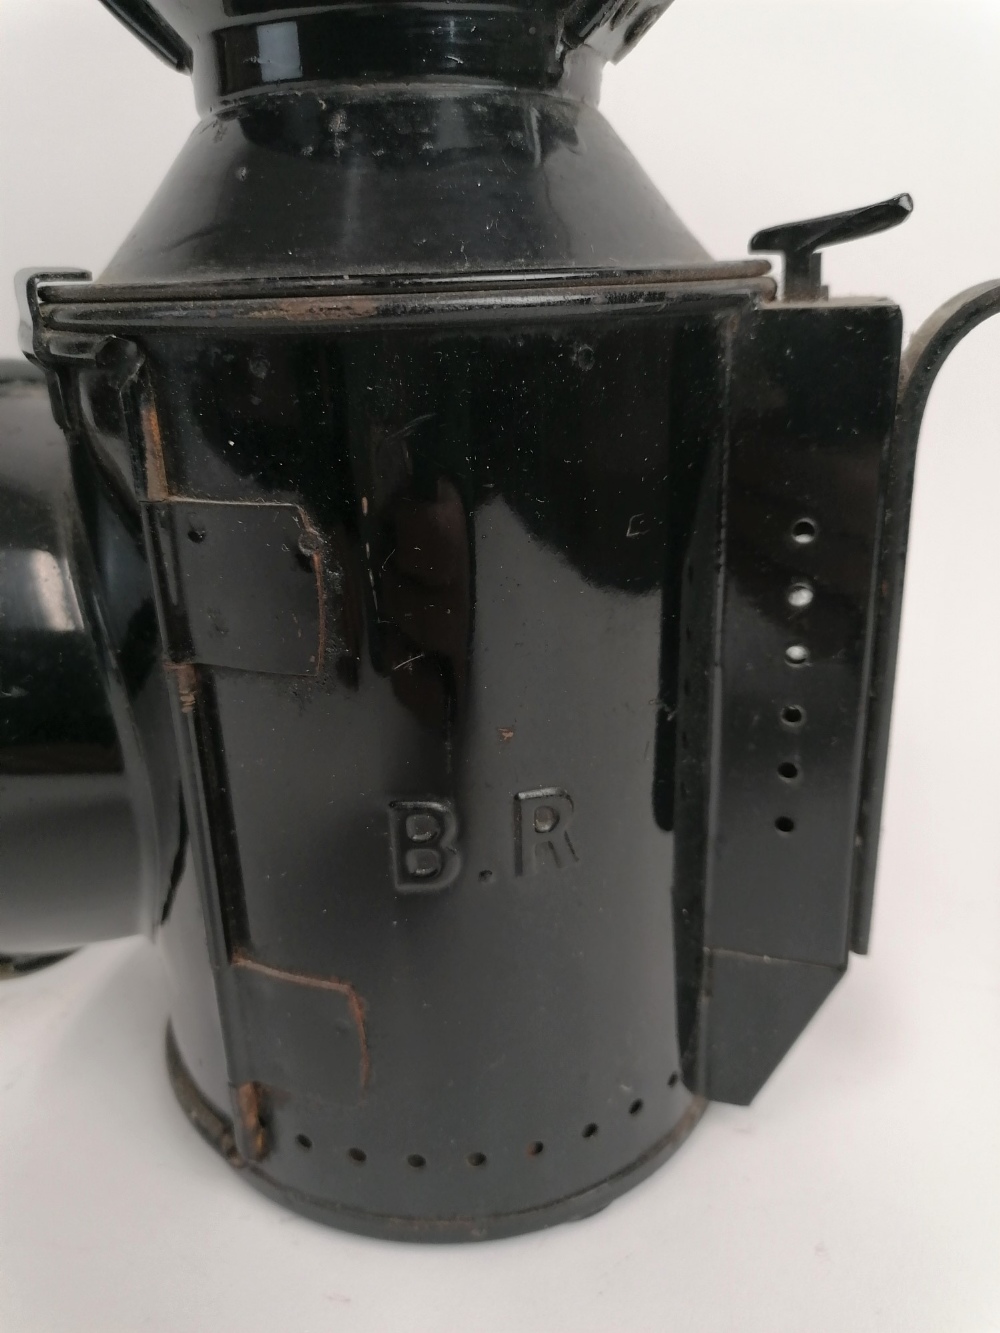 A British Railways three aspect hand lamp, with embossed BR initials to the side, - Image 3 of 4